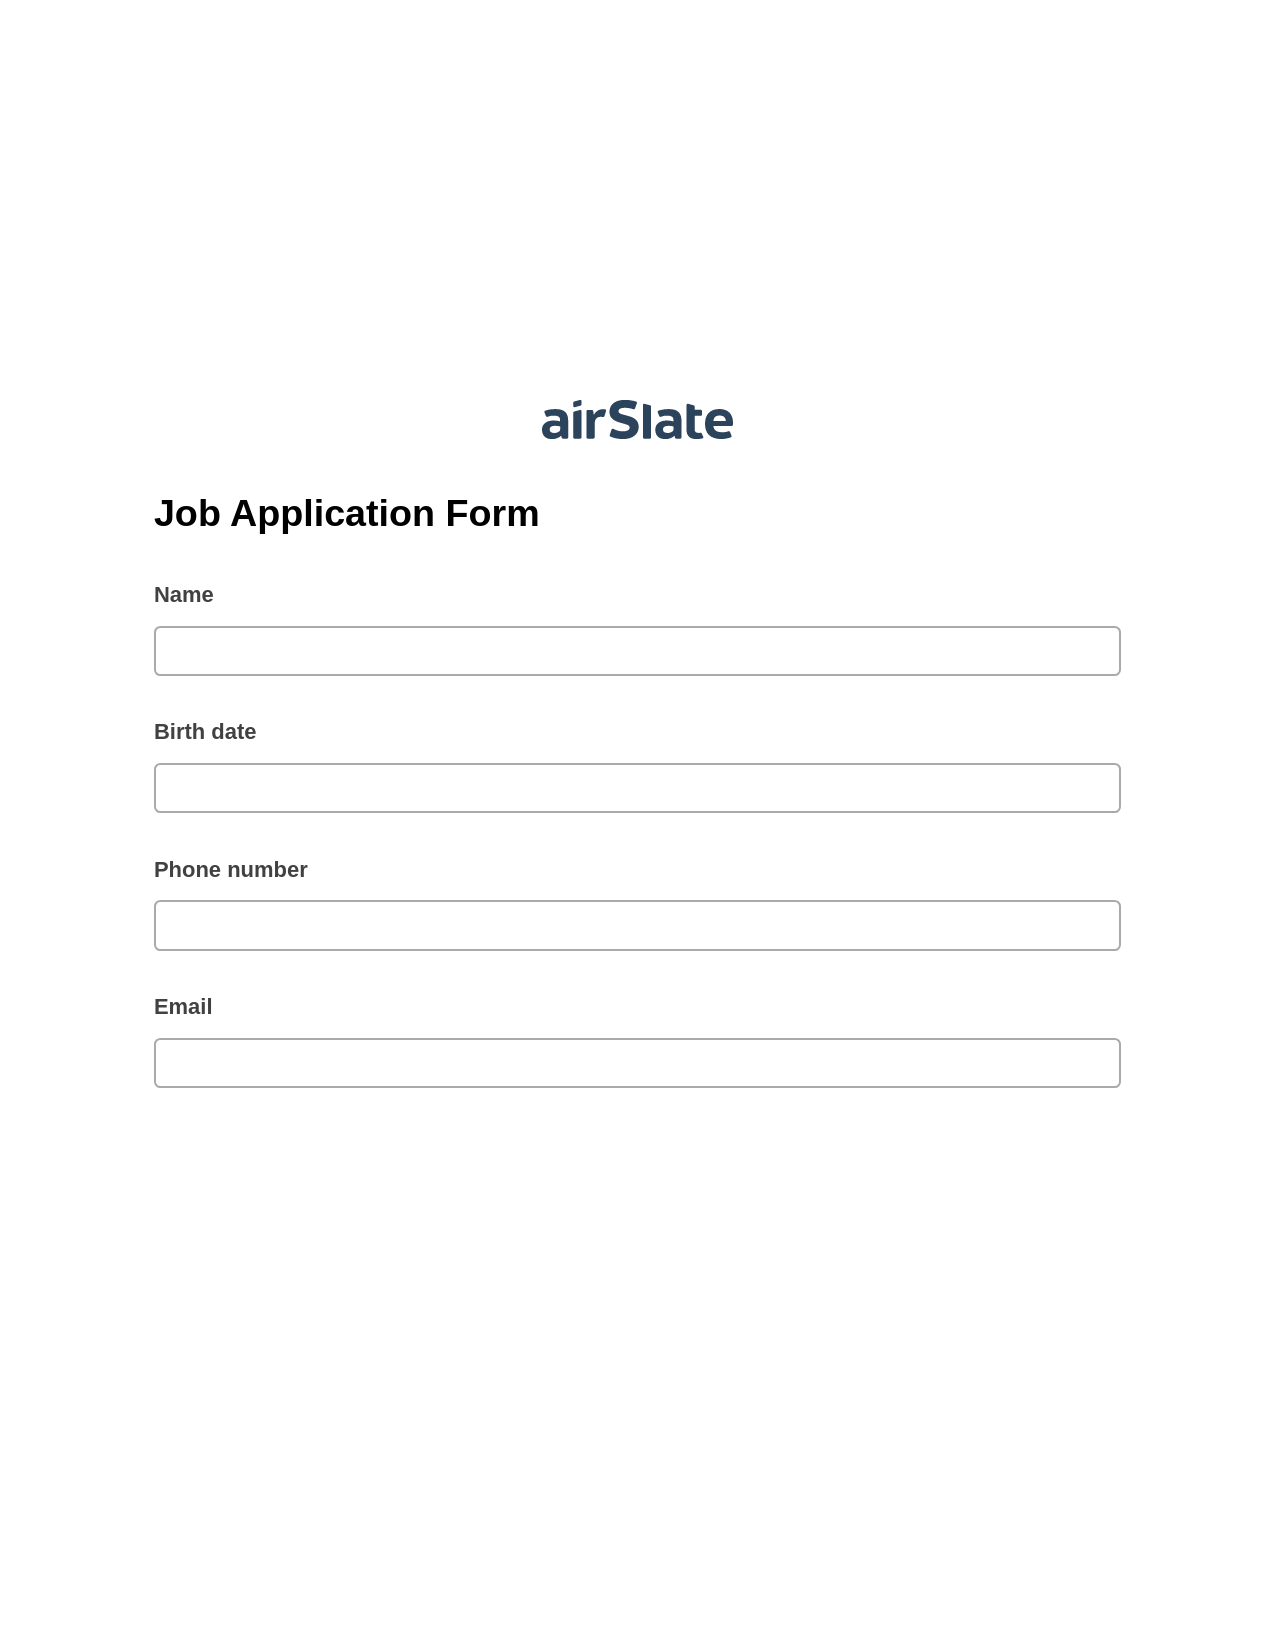 Multirole Job Application Form Pre-fill from Excel Spreadsheet Dropdown Options Bot, Create Slate from another Flow Bot, Export to Excel 365 Bot